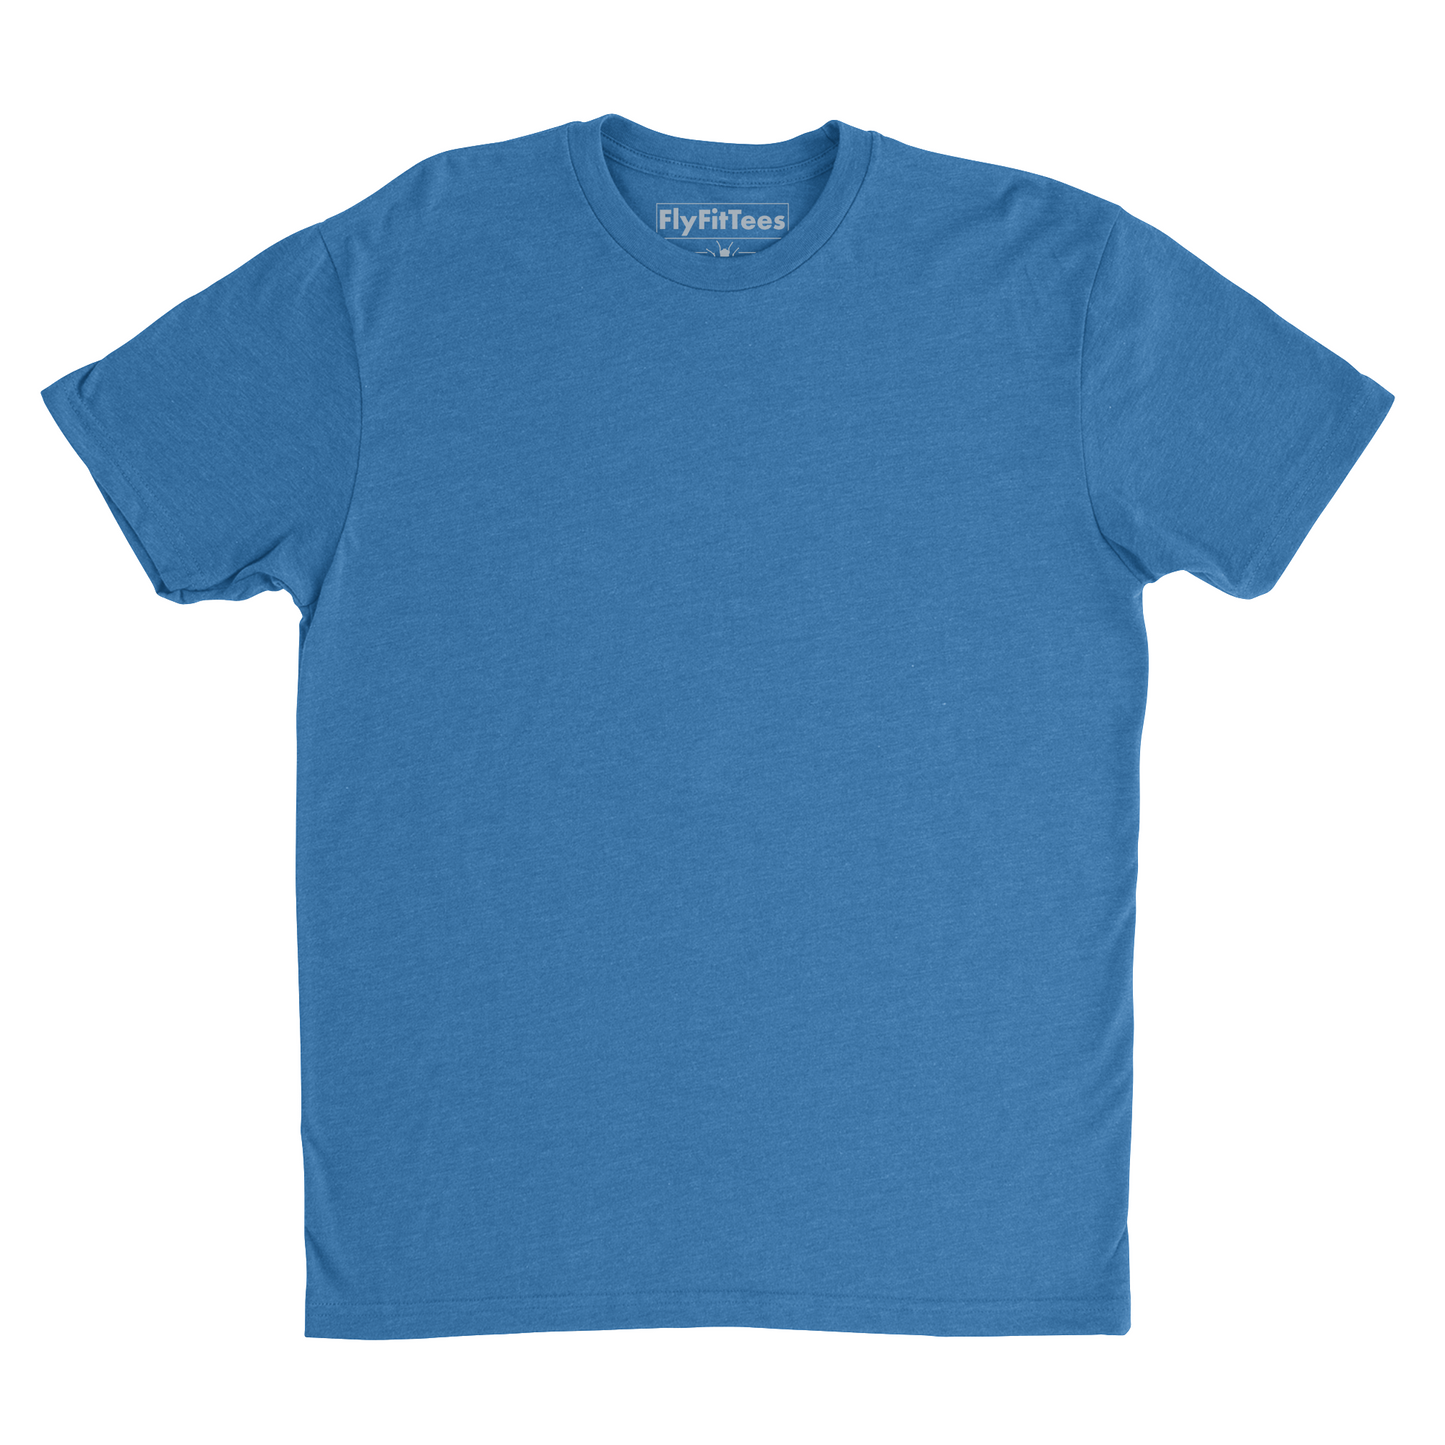 SoFly Original Perfect Fit Tee - 3 Pack - Case of the blues (Final Chance - only few left)